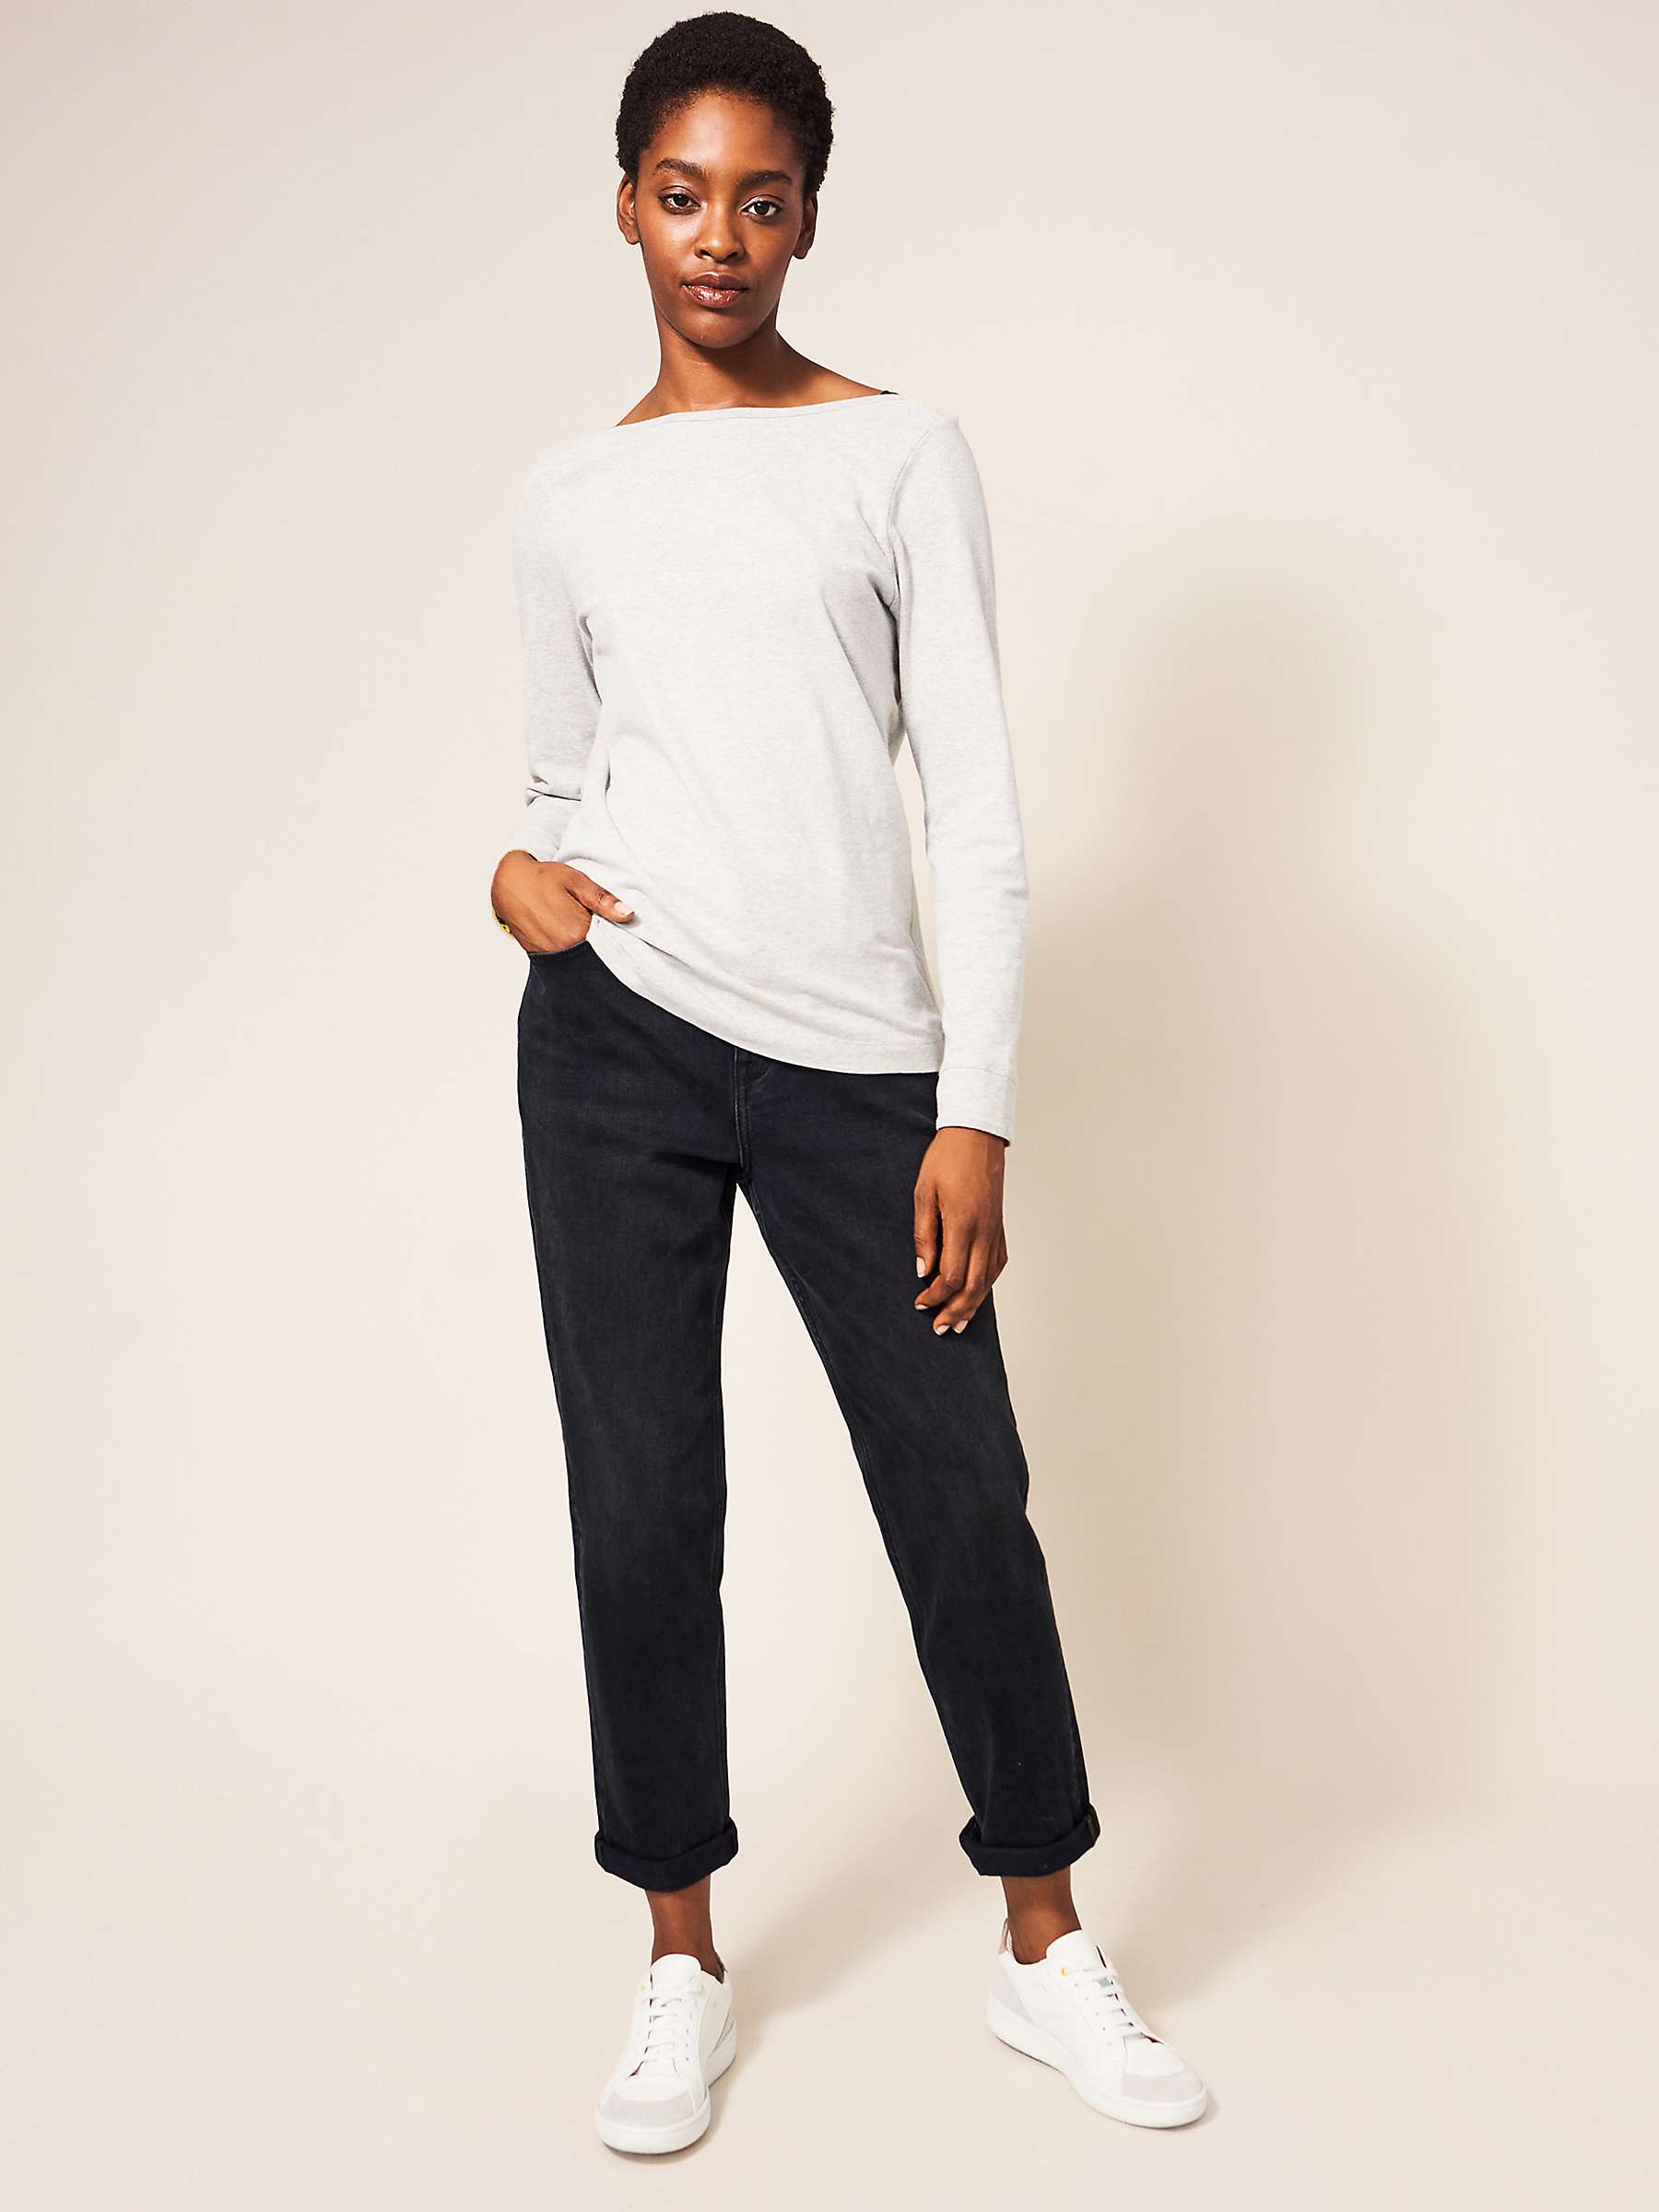 Buy White Stuff Katy Relaxed Slim Jeans, Washed Black Online at johnlewis.com